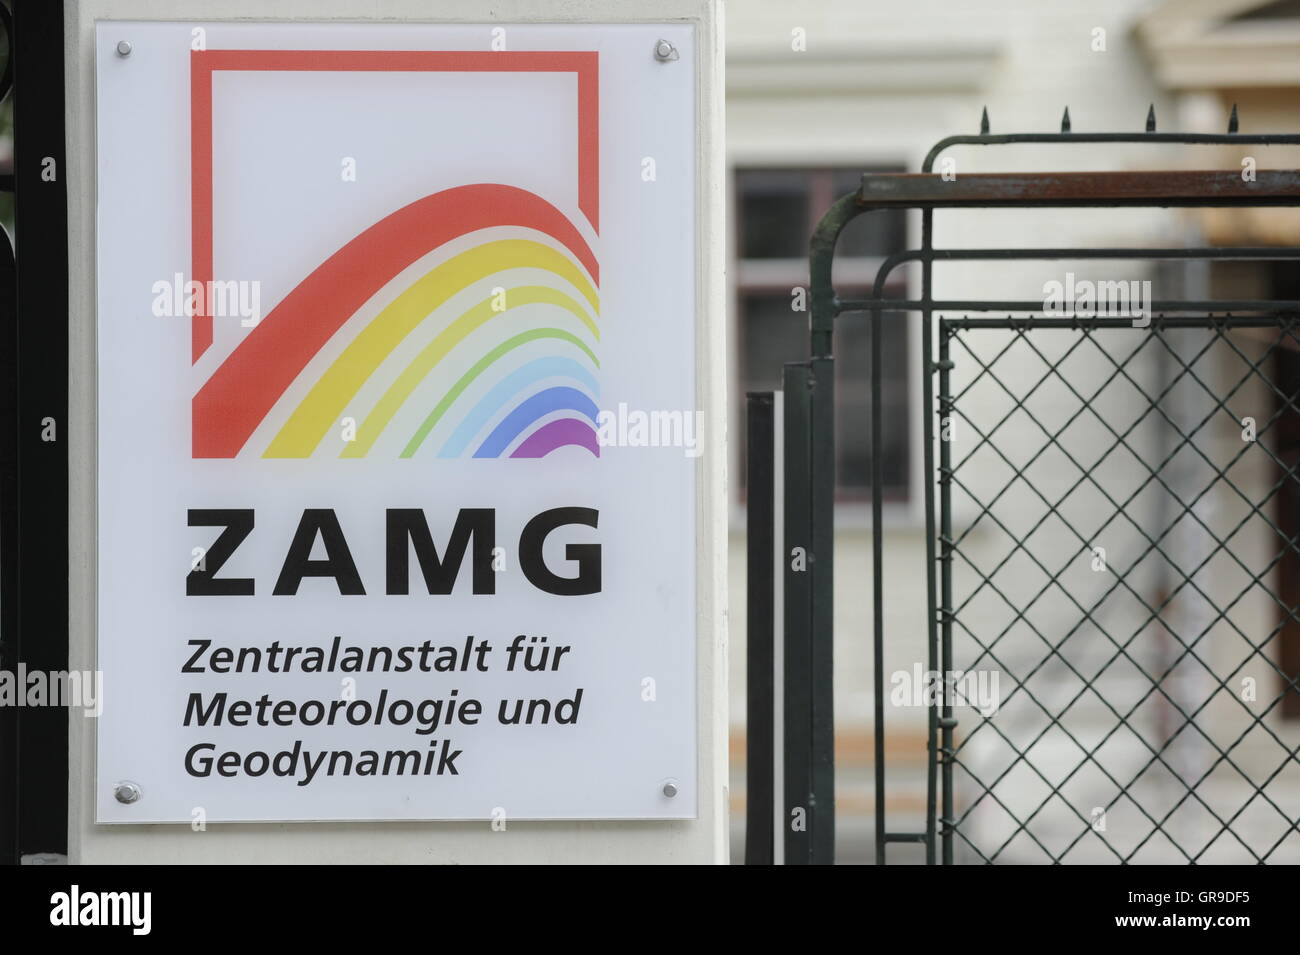 Central Institution For Meteorology And Geodynamics Zamg, Vienna Stock Photo